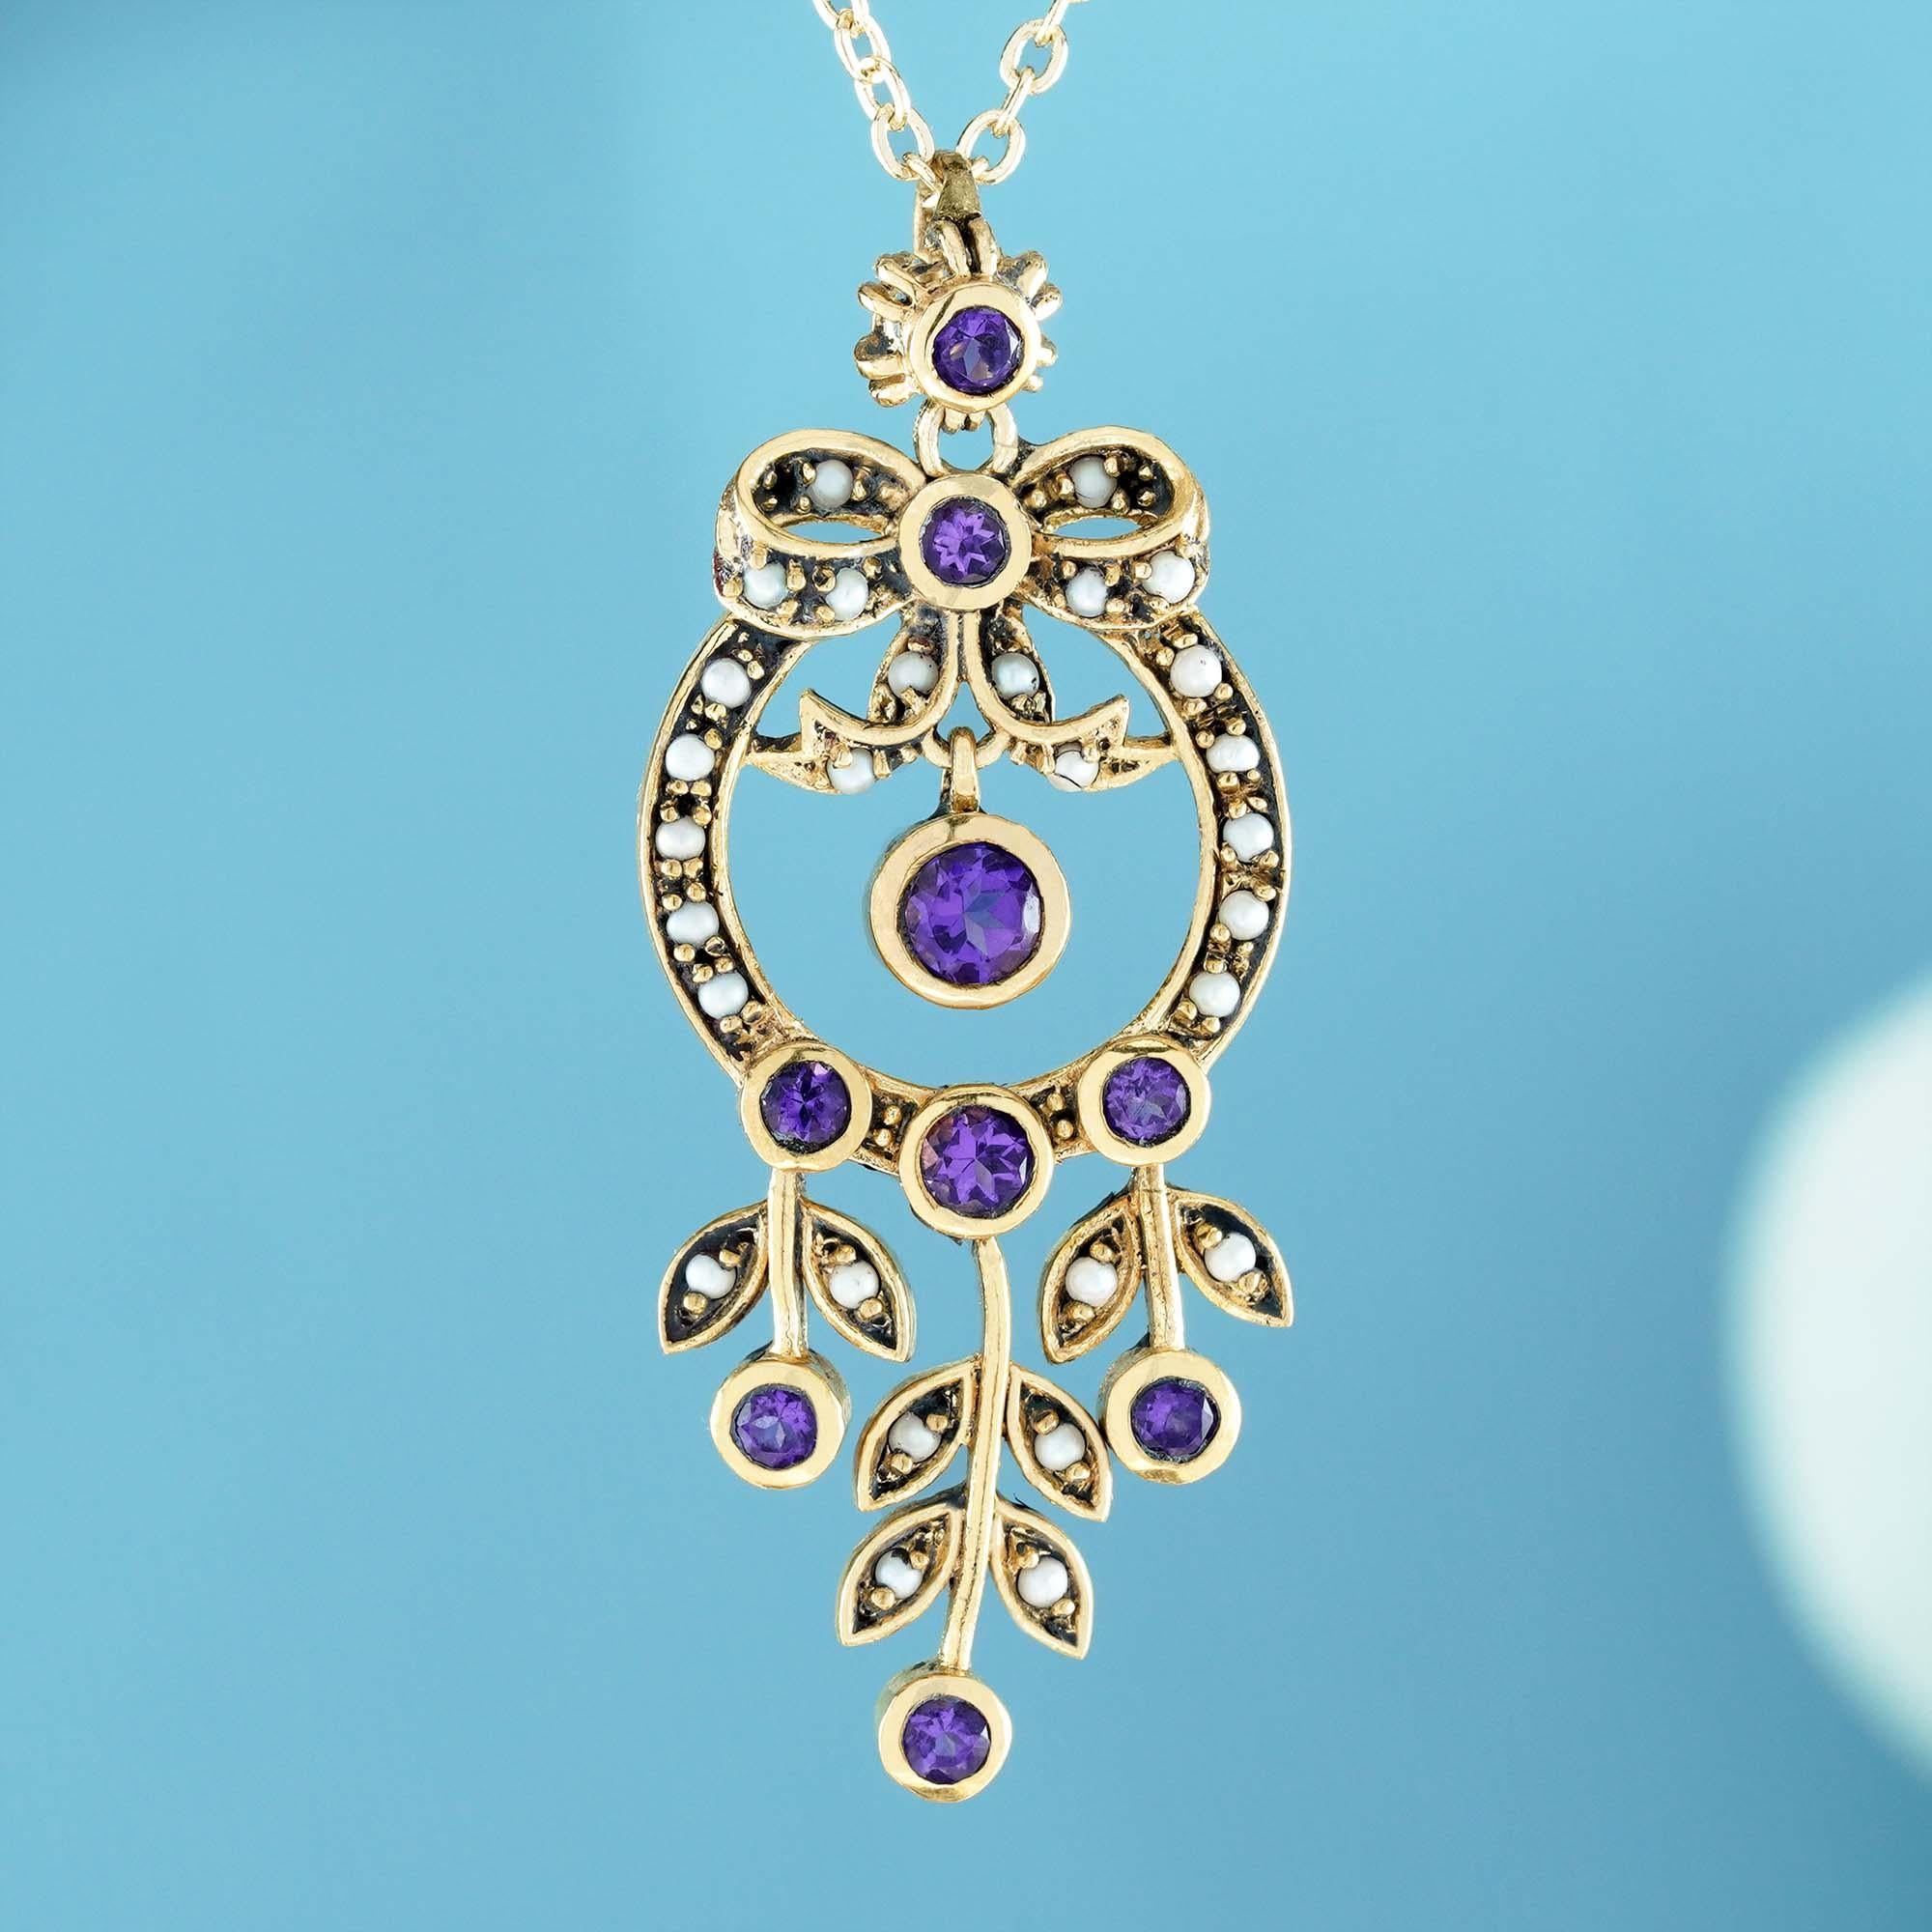 This vintage-style delicate pendant made of purple amethyst and white pearls, The amethysts and pearls are set in a delicate floral ribbon design, with gold leaves and vines accenting the piece. The small round flower features a central cluster of